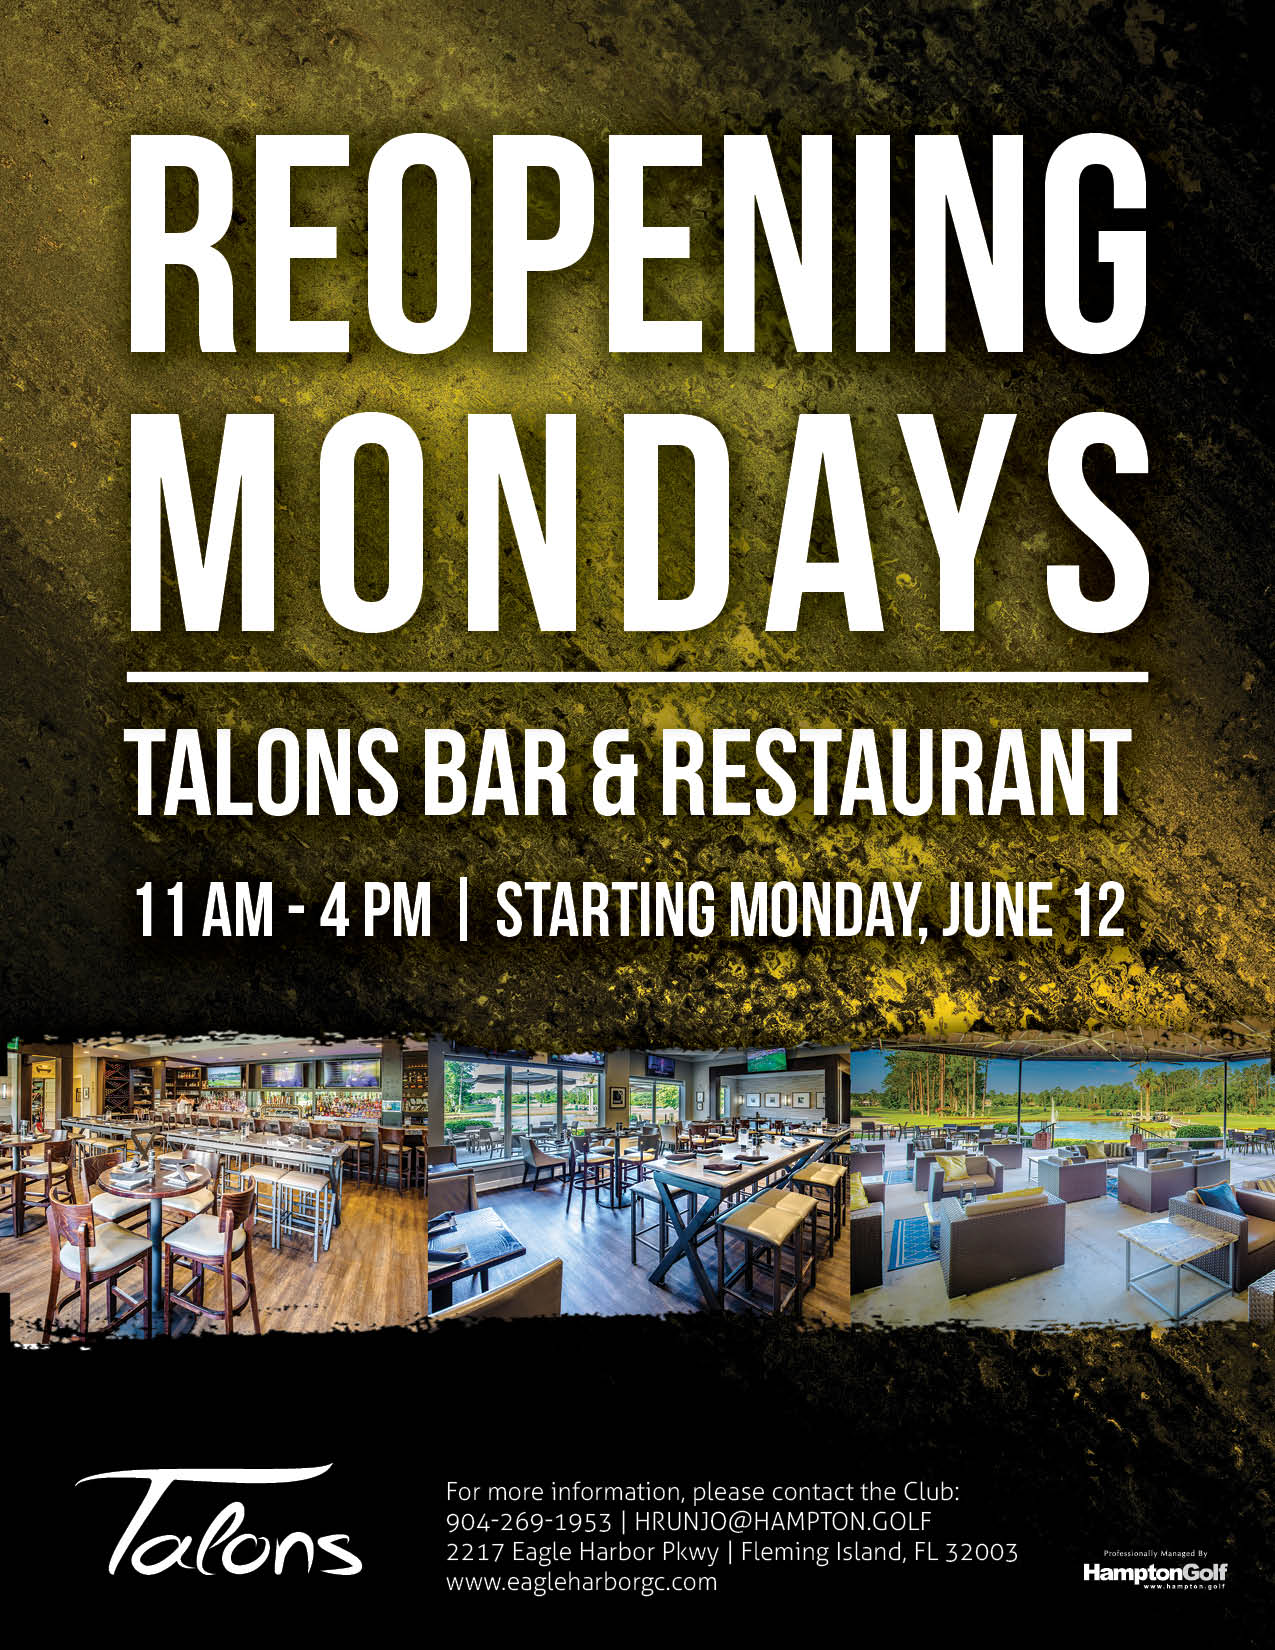 EH Talons Bar Restaurant Reopening Mondays EMAIL